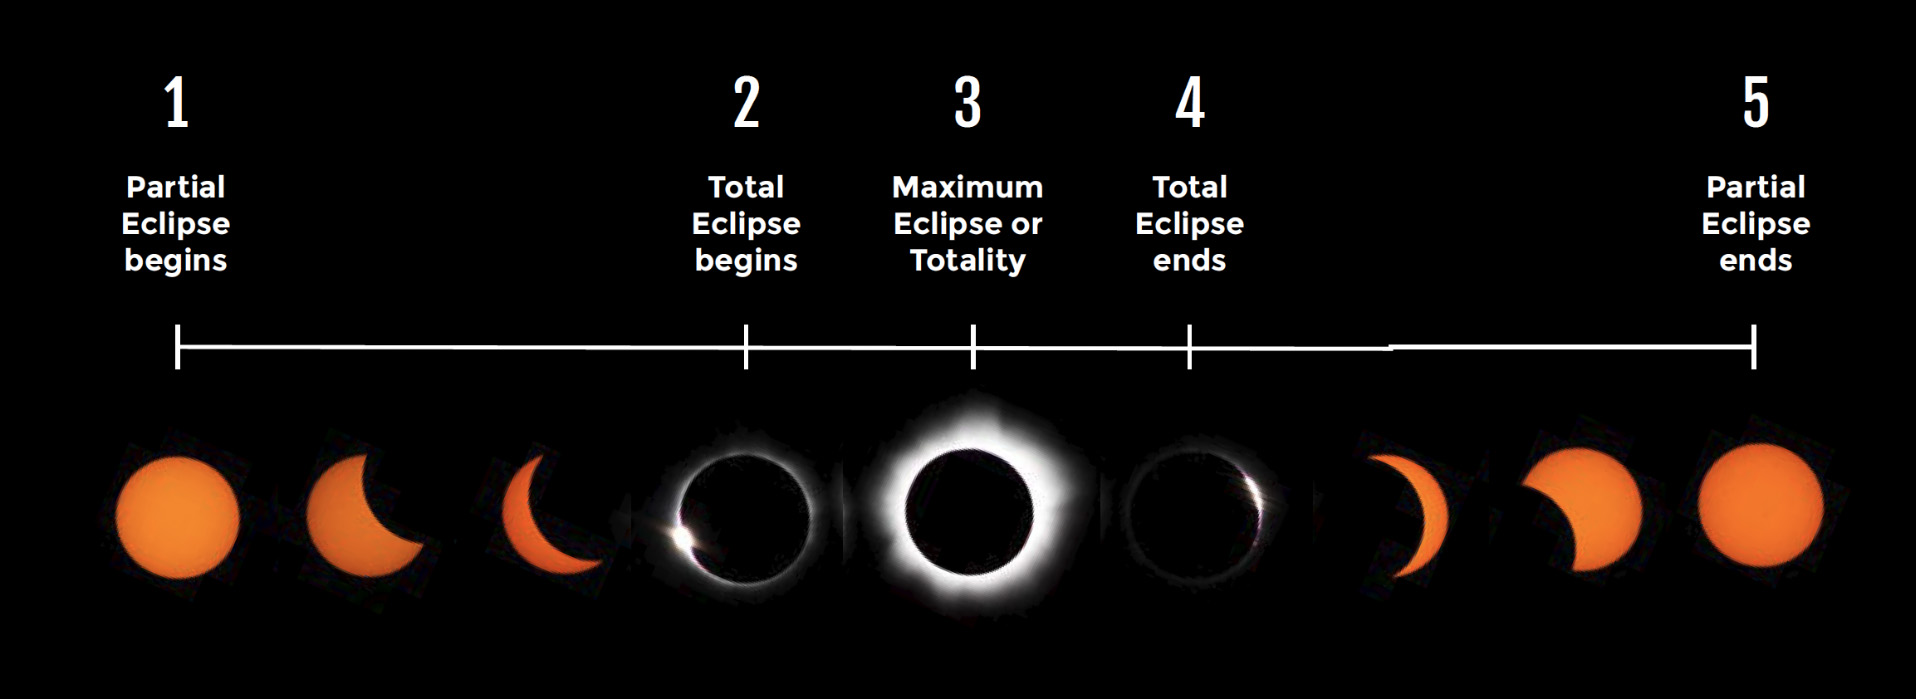 5 Stages of a Total Eclipse Solar Eclipse Guide